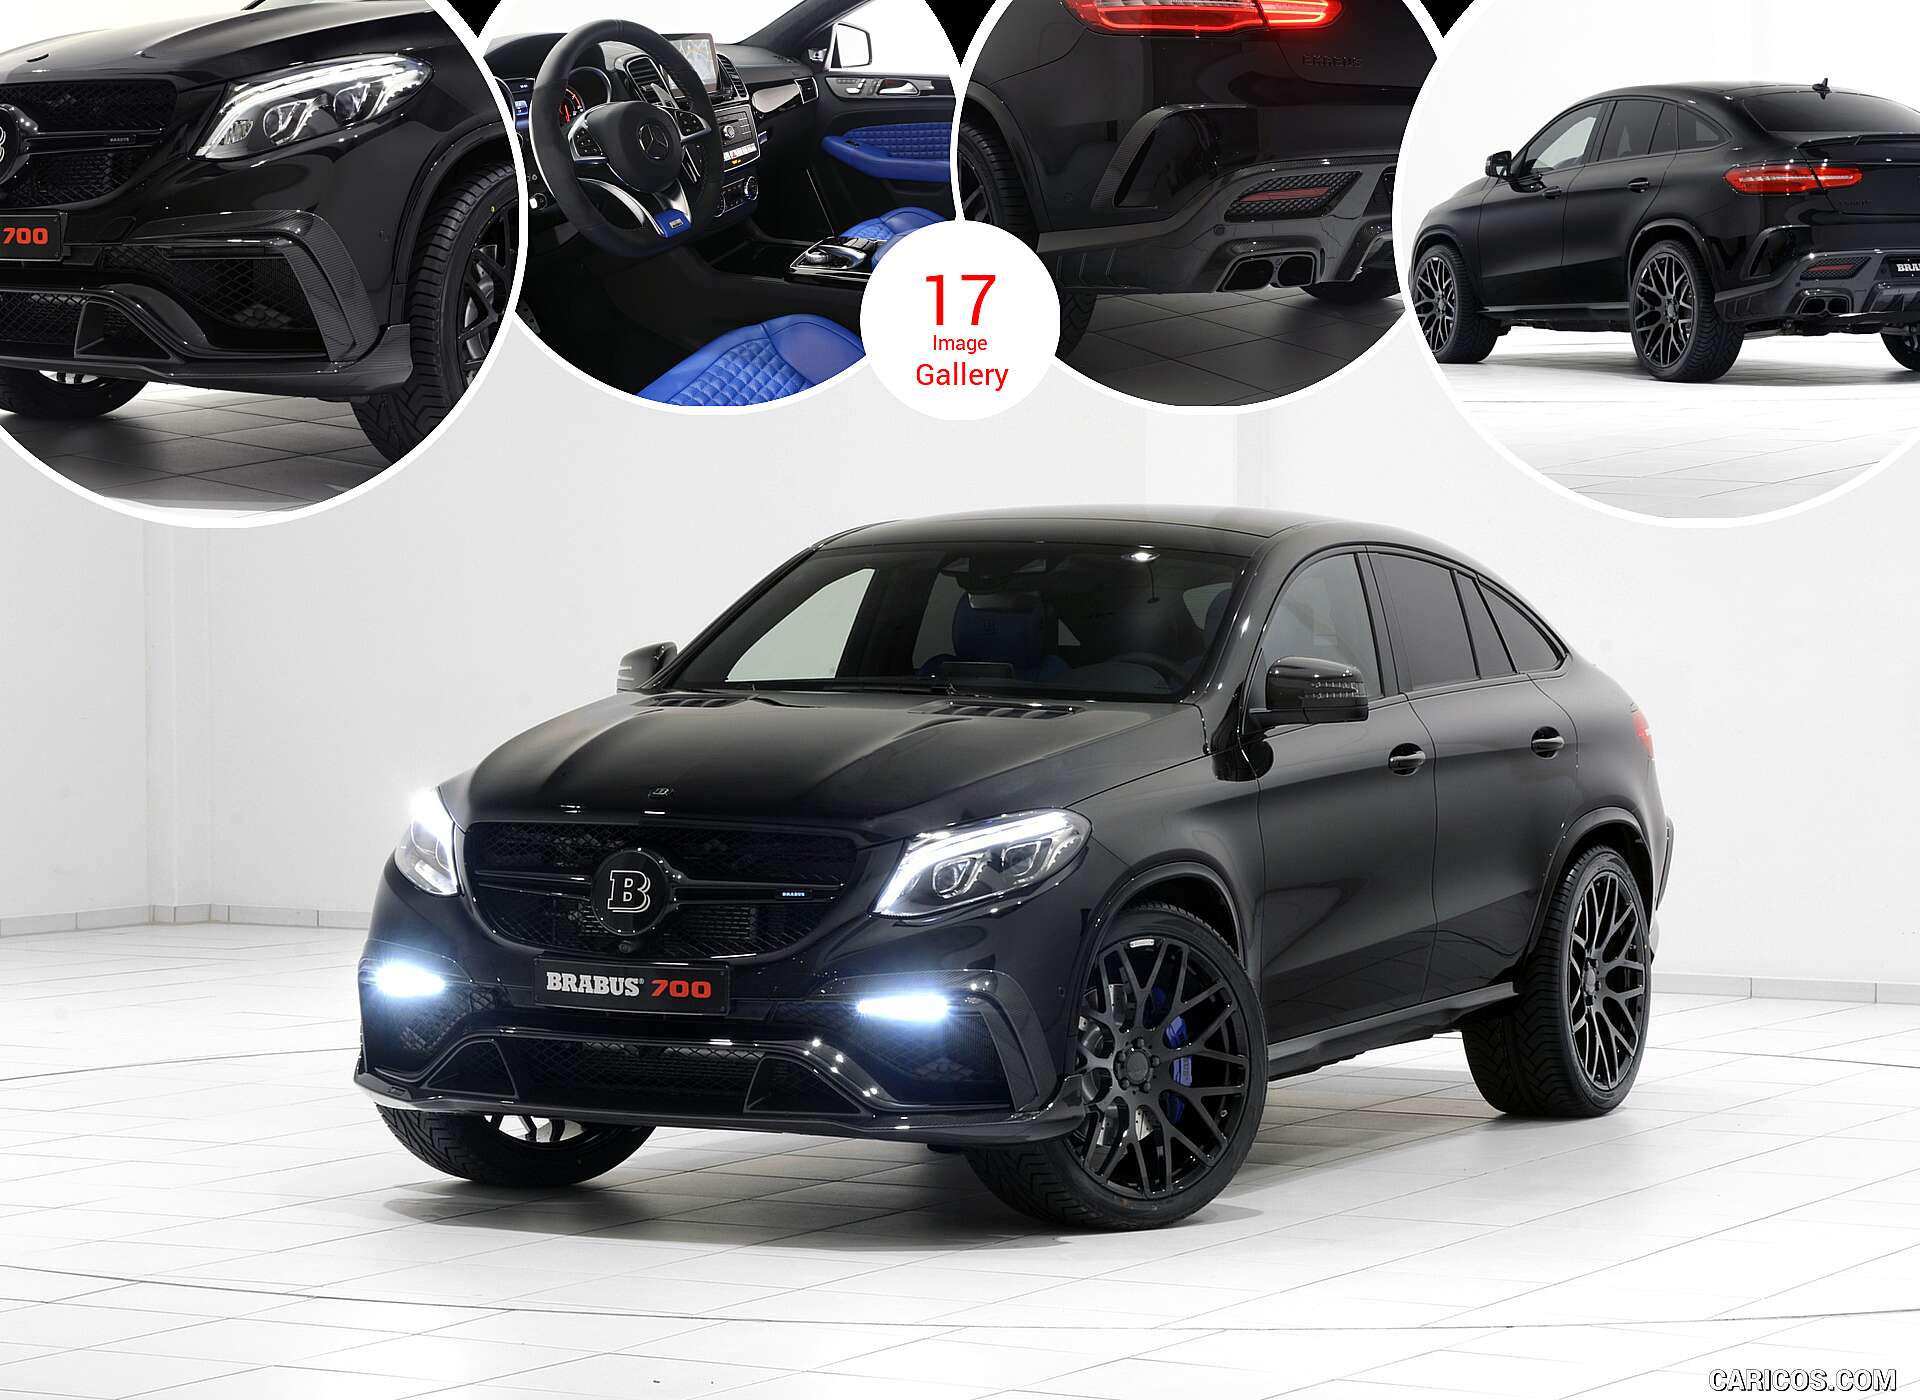 2016 Brabus 700 Coupé Based On The Mercedes Amg Gle 63 S